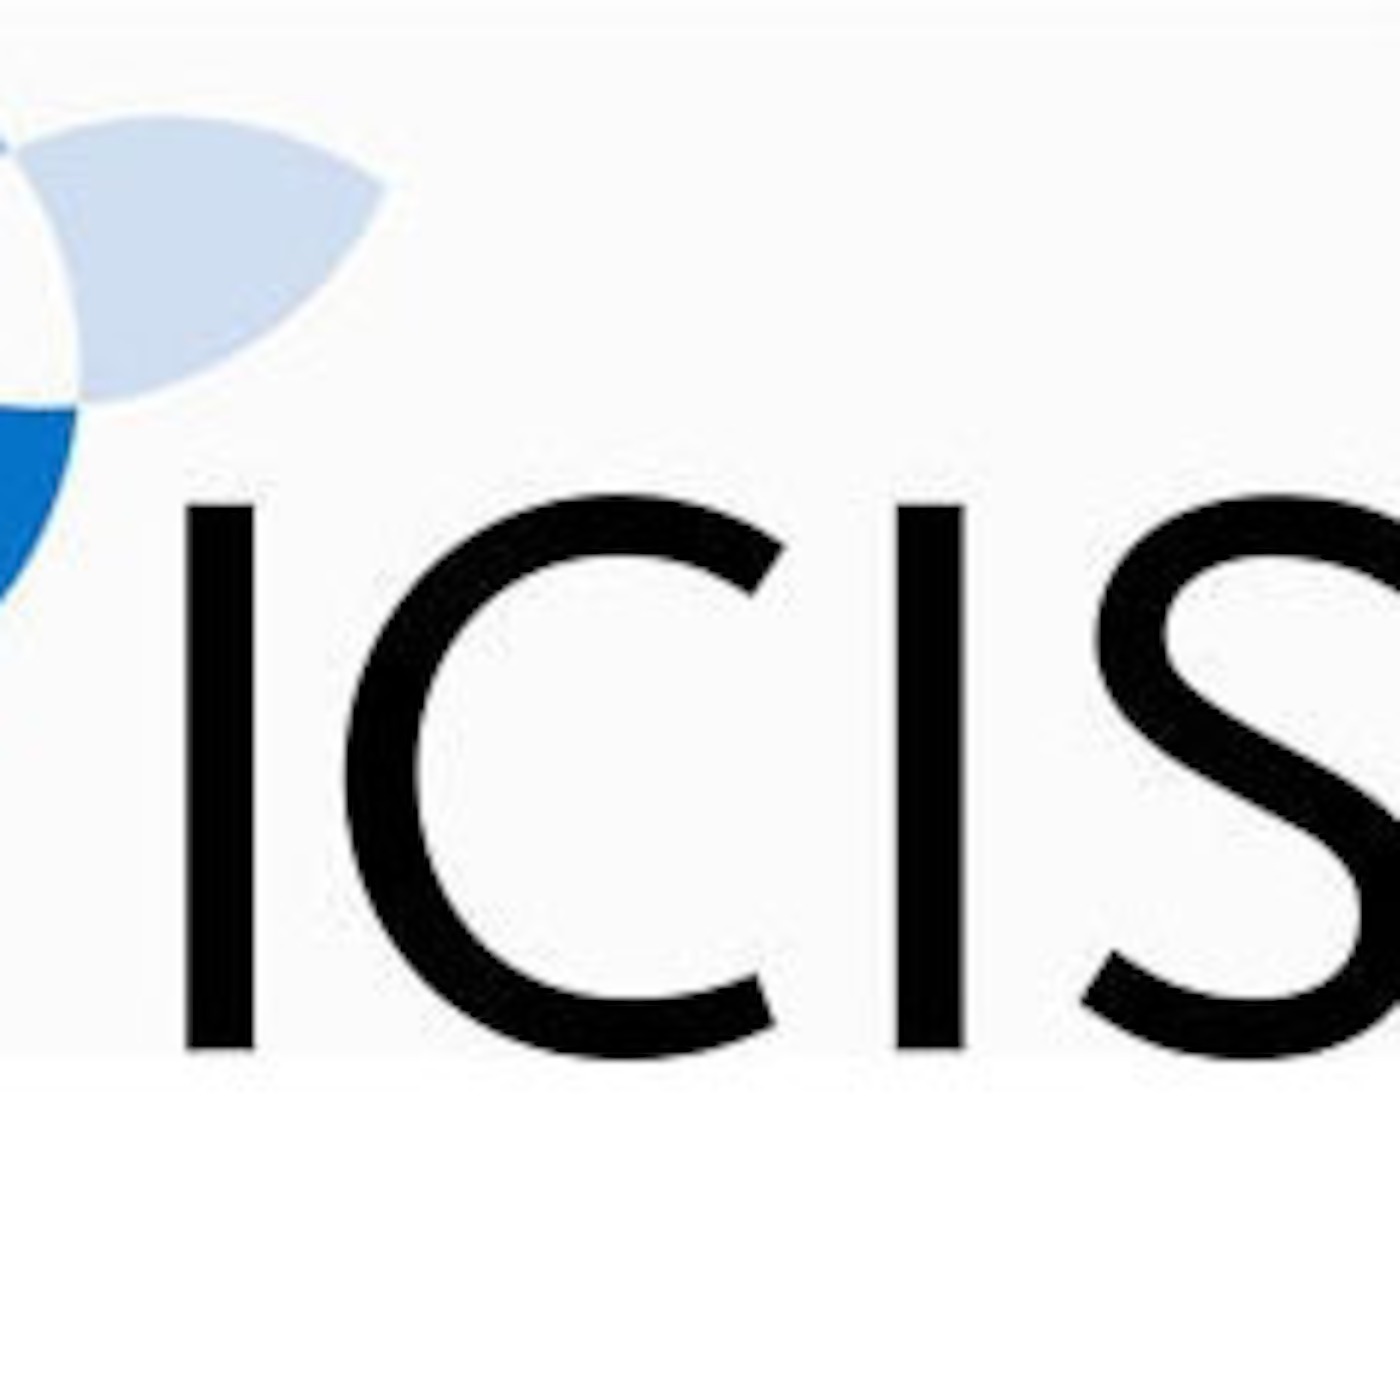 Latin American PVC prices rising on Asia trends - ICIS Americas Podcast 12 July 2018